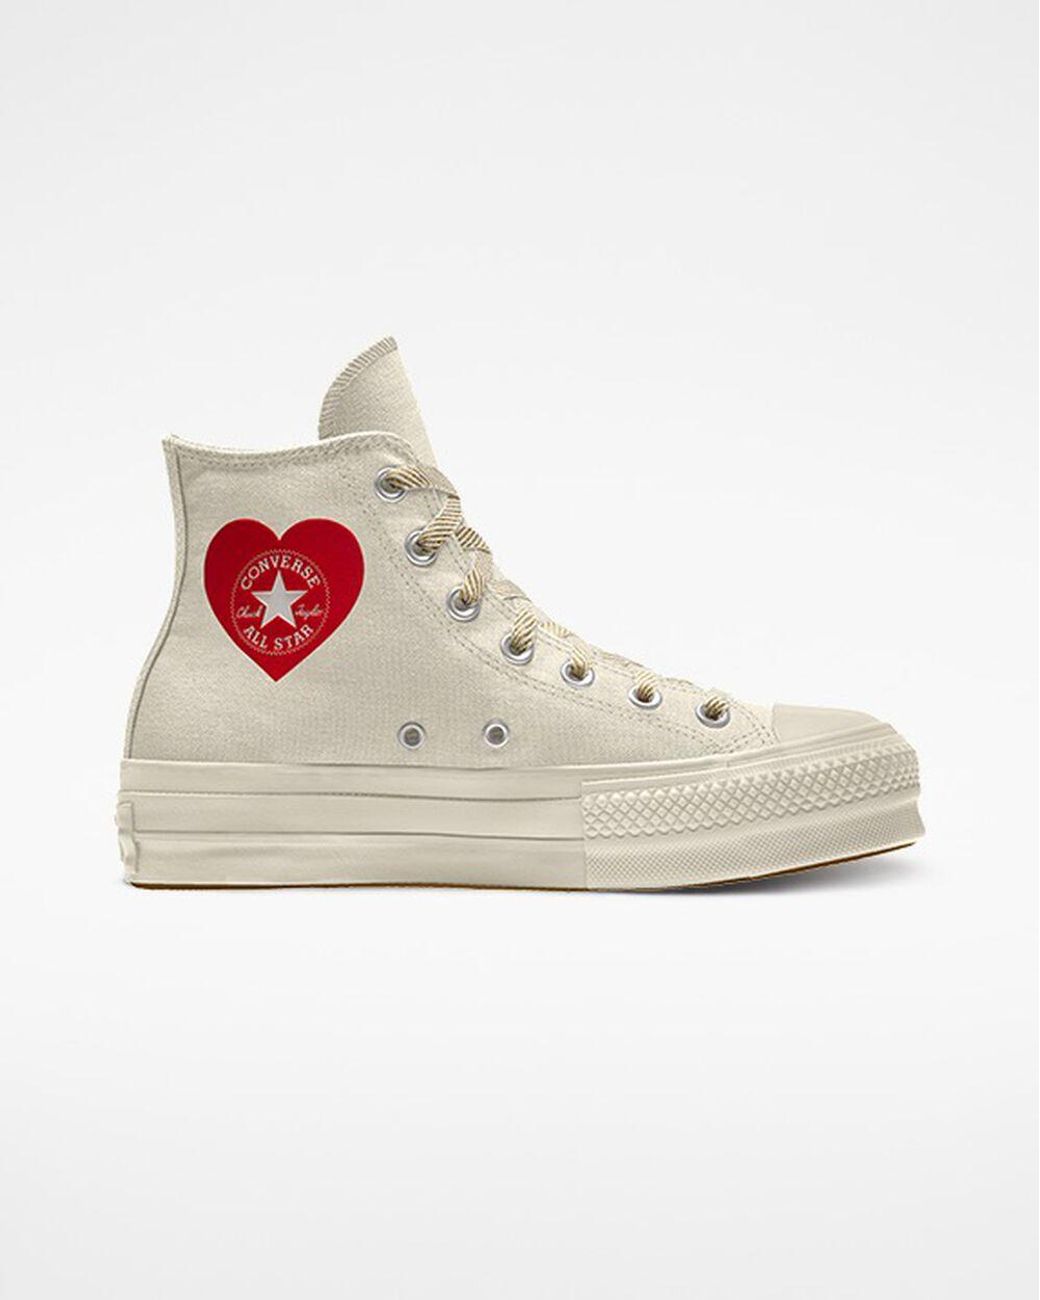 Converse Chuck Taylor All Star '70 High Multi Red Heart